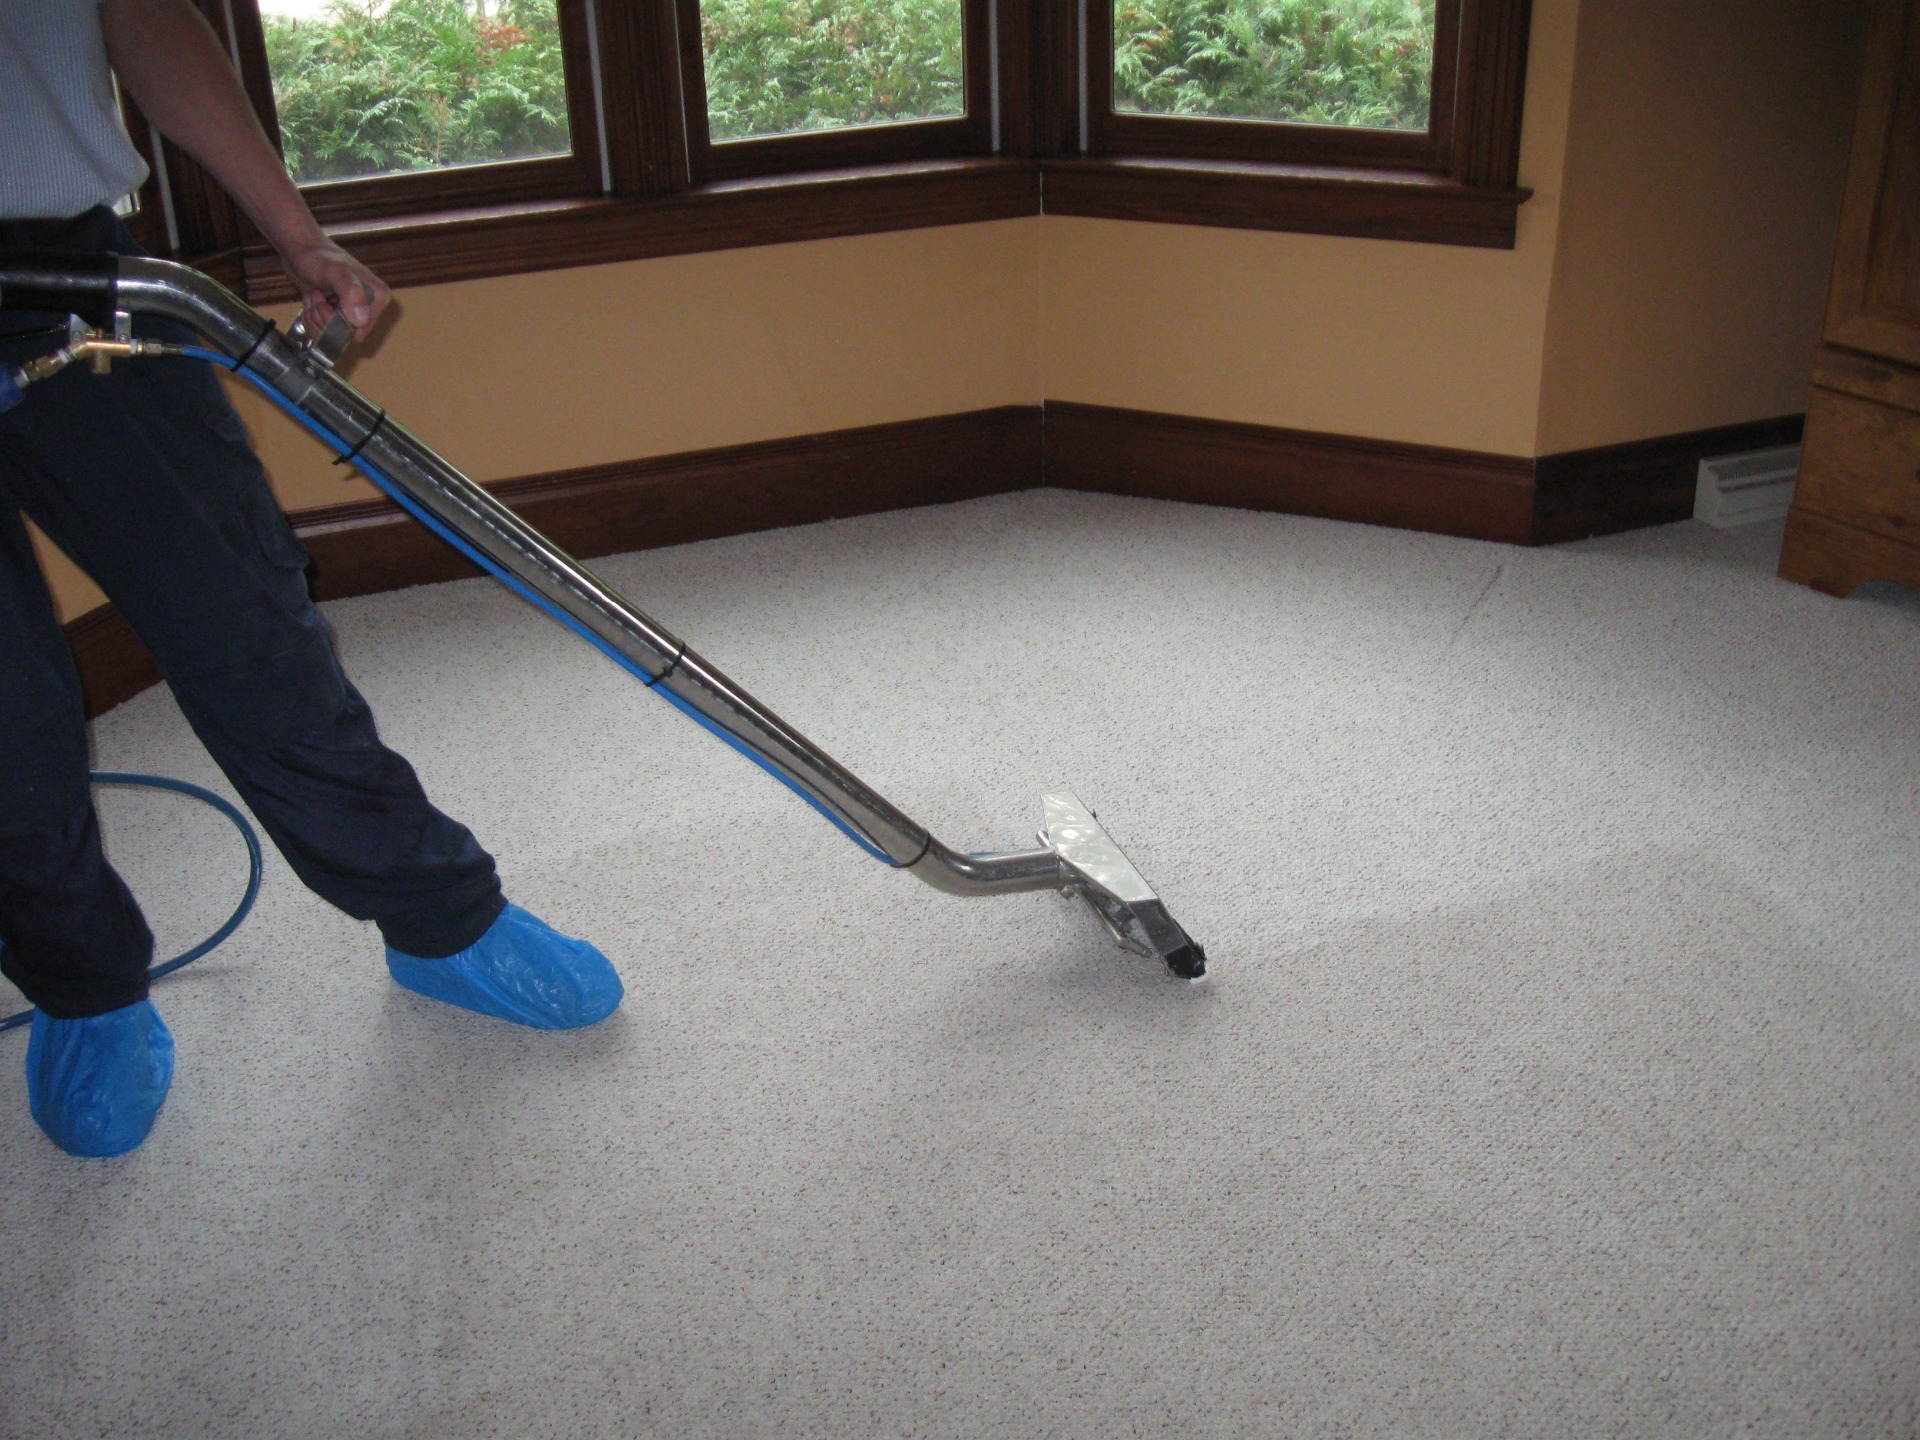 There are a number of options, including these: Cheltenham Carpet Cleaning cleans